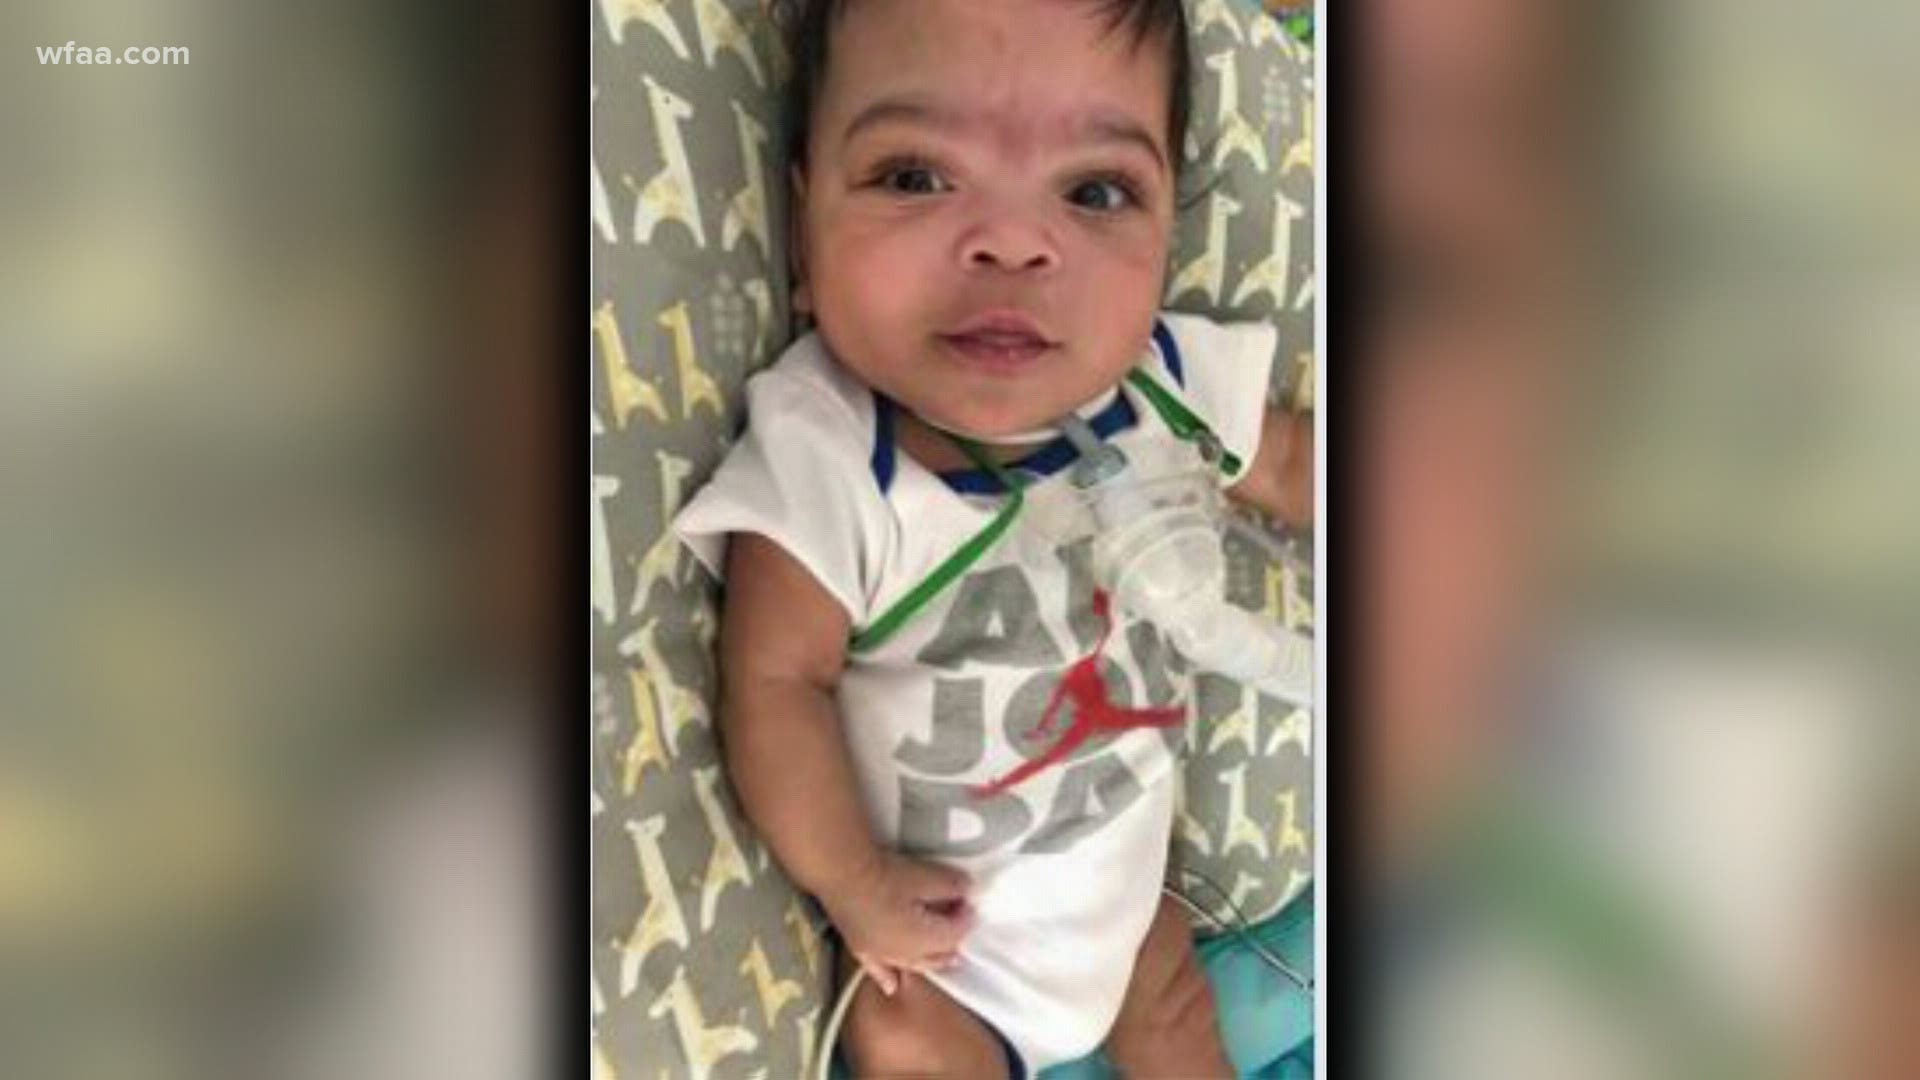 Baby Karter was born 14 weeks premature in August. He’s been in the hospital for 260 days and has finally been taken off a ventilator and is now breathing on his own